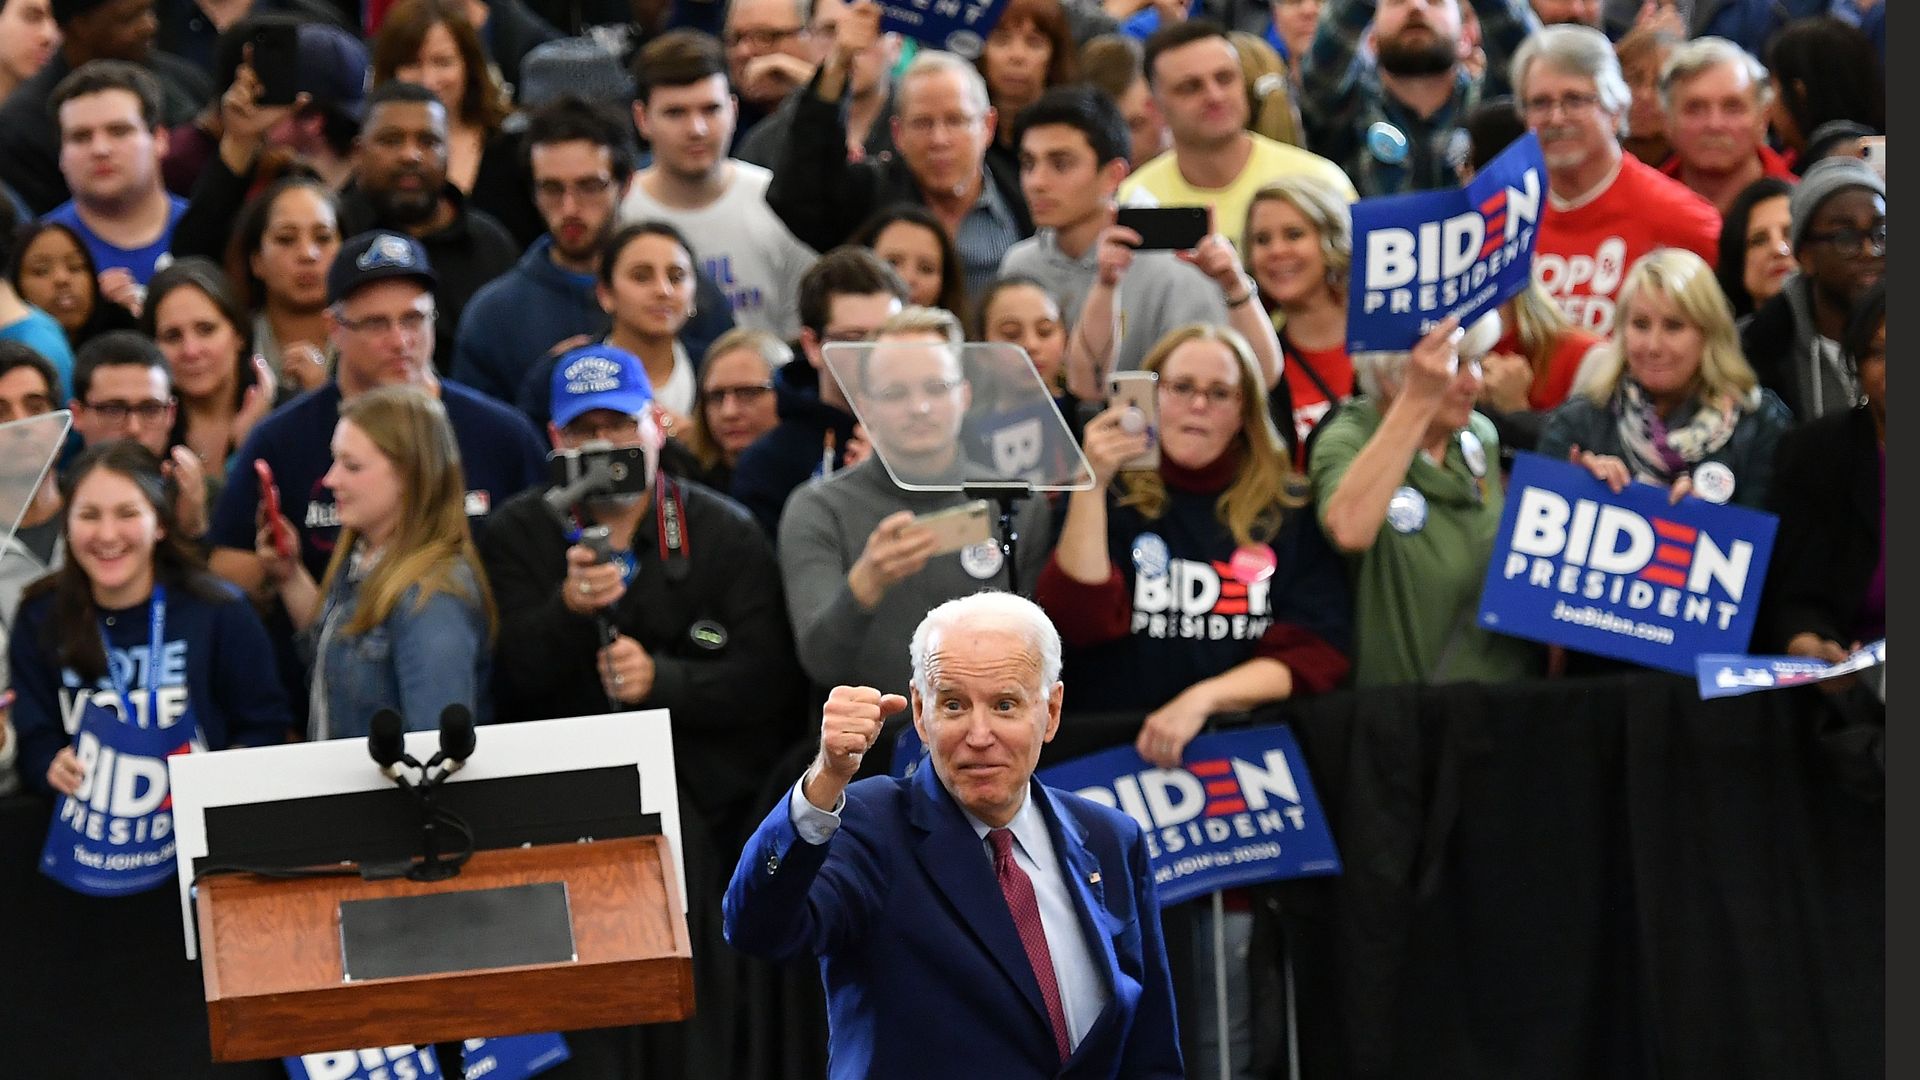  Former Vice President Joe Biden gestures during a campaign rally at Renaissance High School in Detroit, Michigan on March 9, 2020.